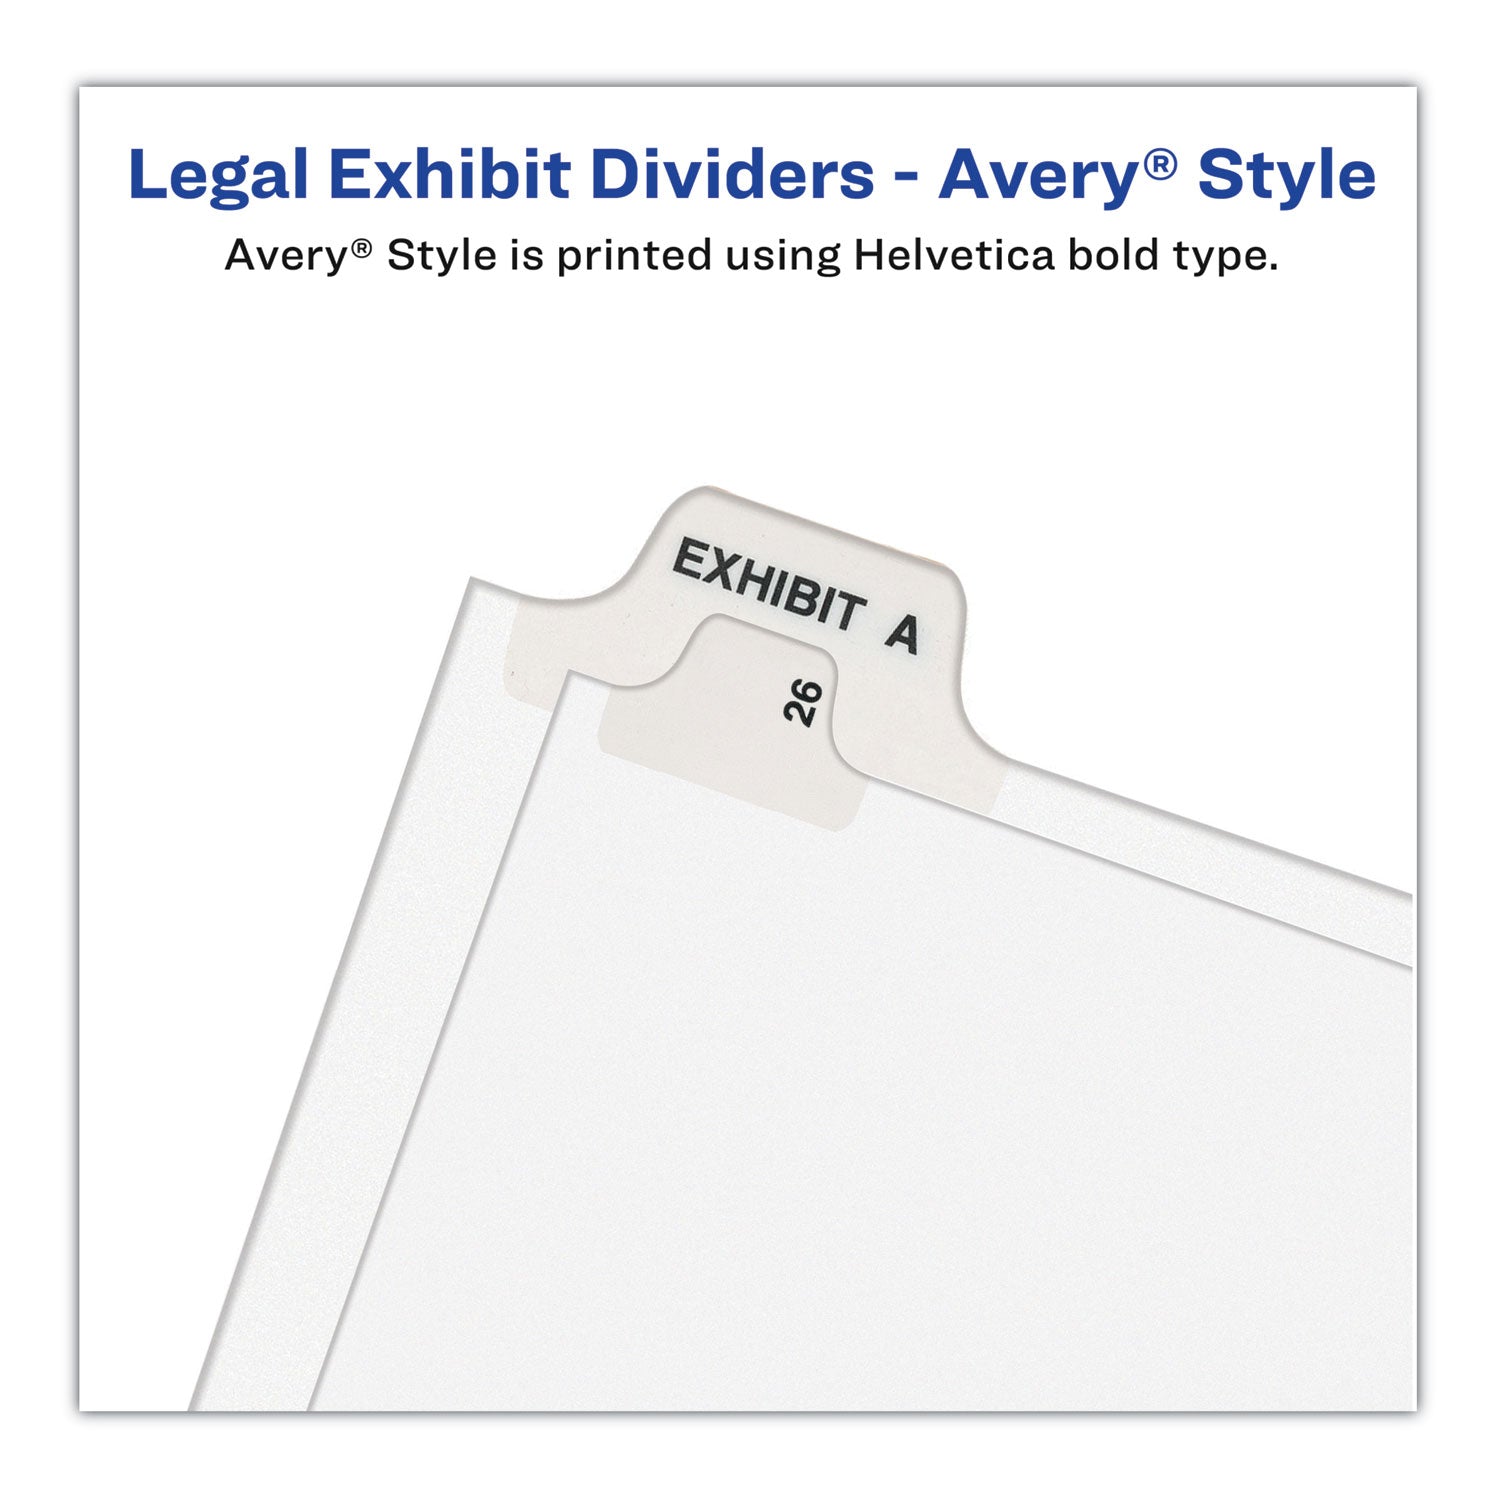 Preprinted Legal Exhibit Side Tab Index Dividers, Avery Style, 25-Tab, 251 to 275, 11 x 8.5, White, 1 Set, (1340) - 